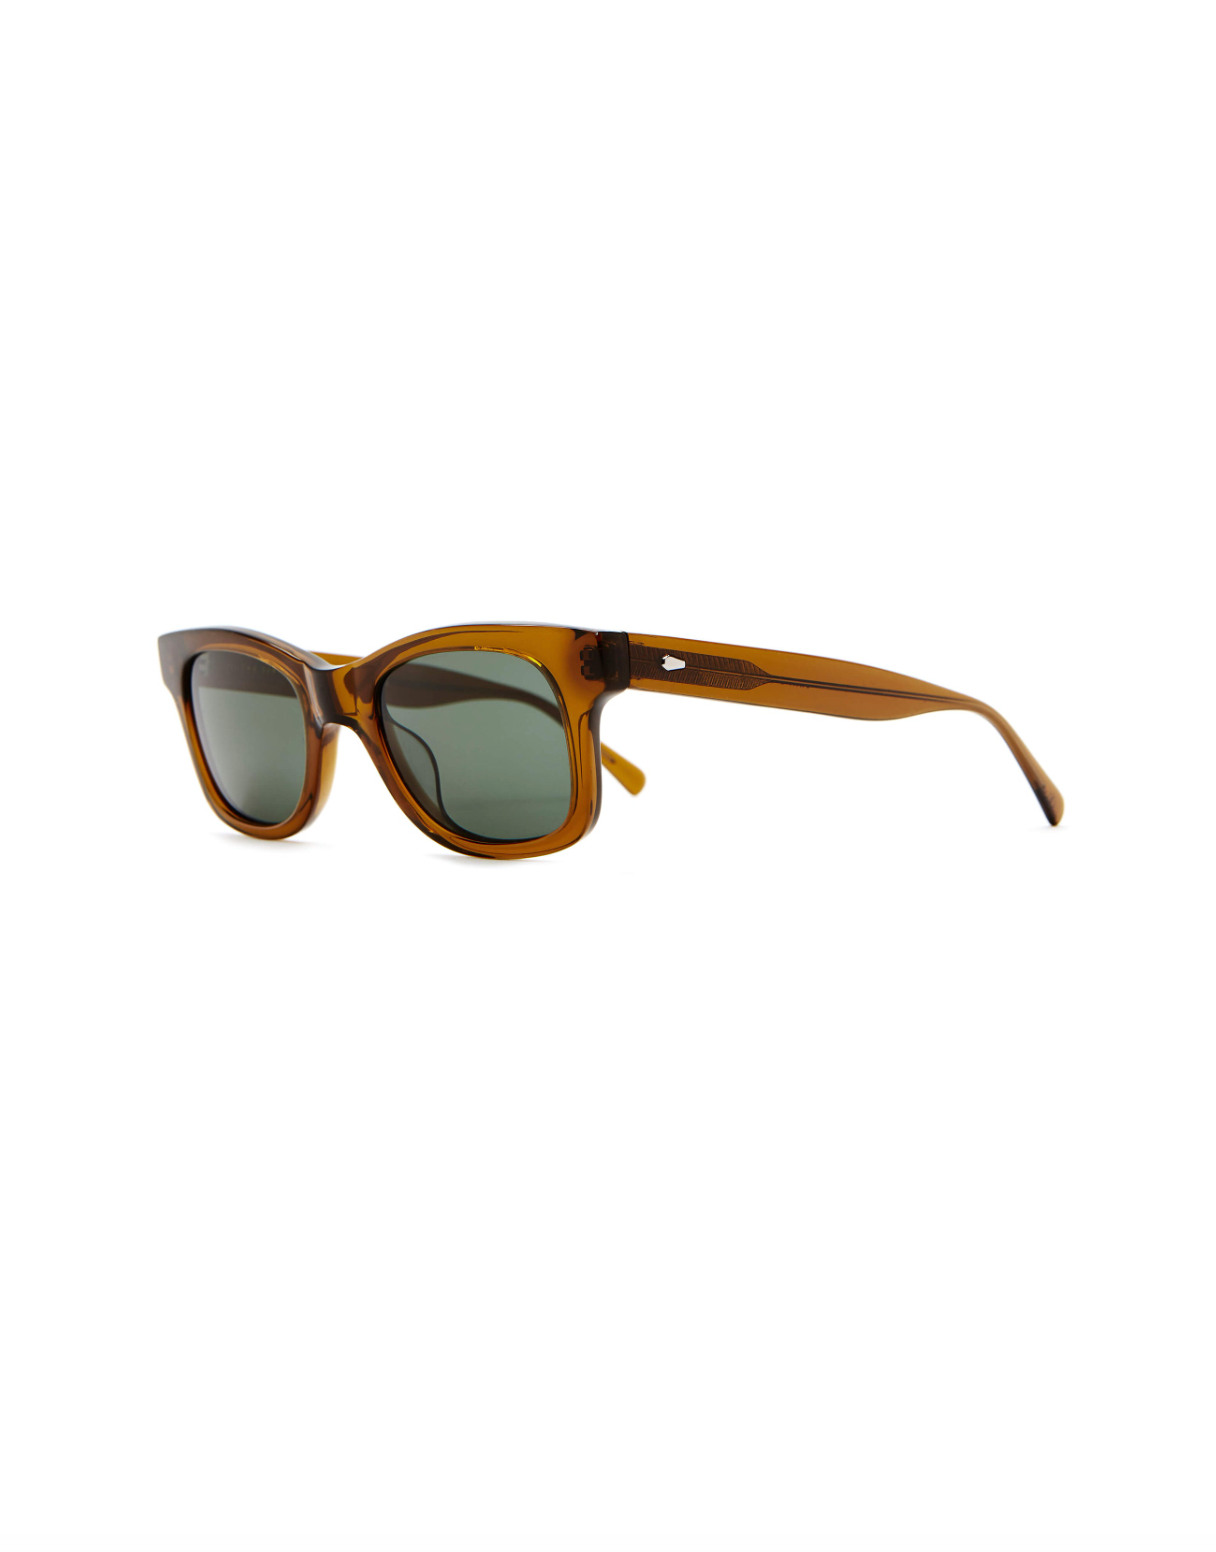 The Suntan Underground is a classic sized frame that favors medium and large sized heads. Features a retro tilt that's common in vintage styles. Handcrafted bioacetate frames—biodegradable, plant-based, earth-friendlier. Rx-ready.